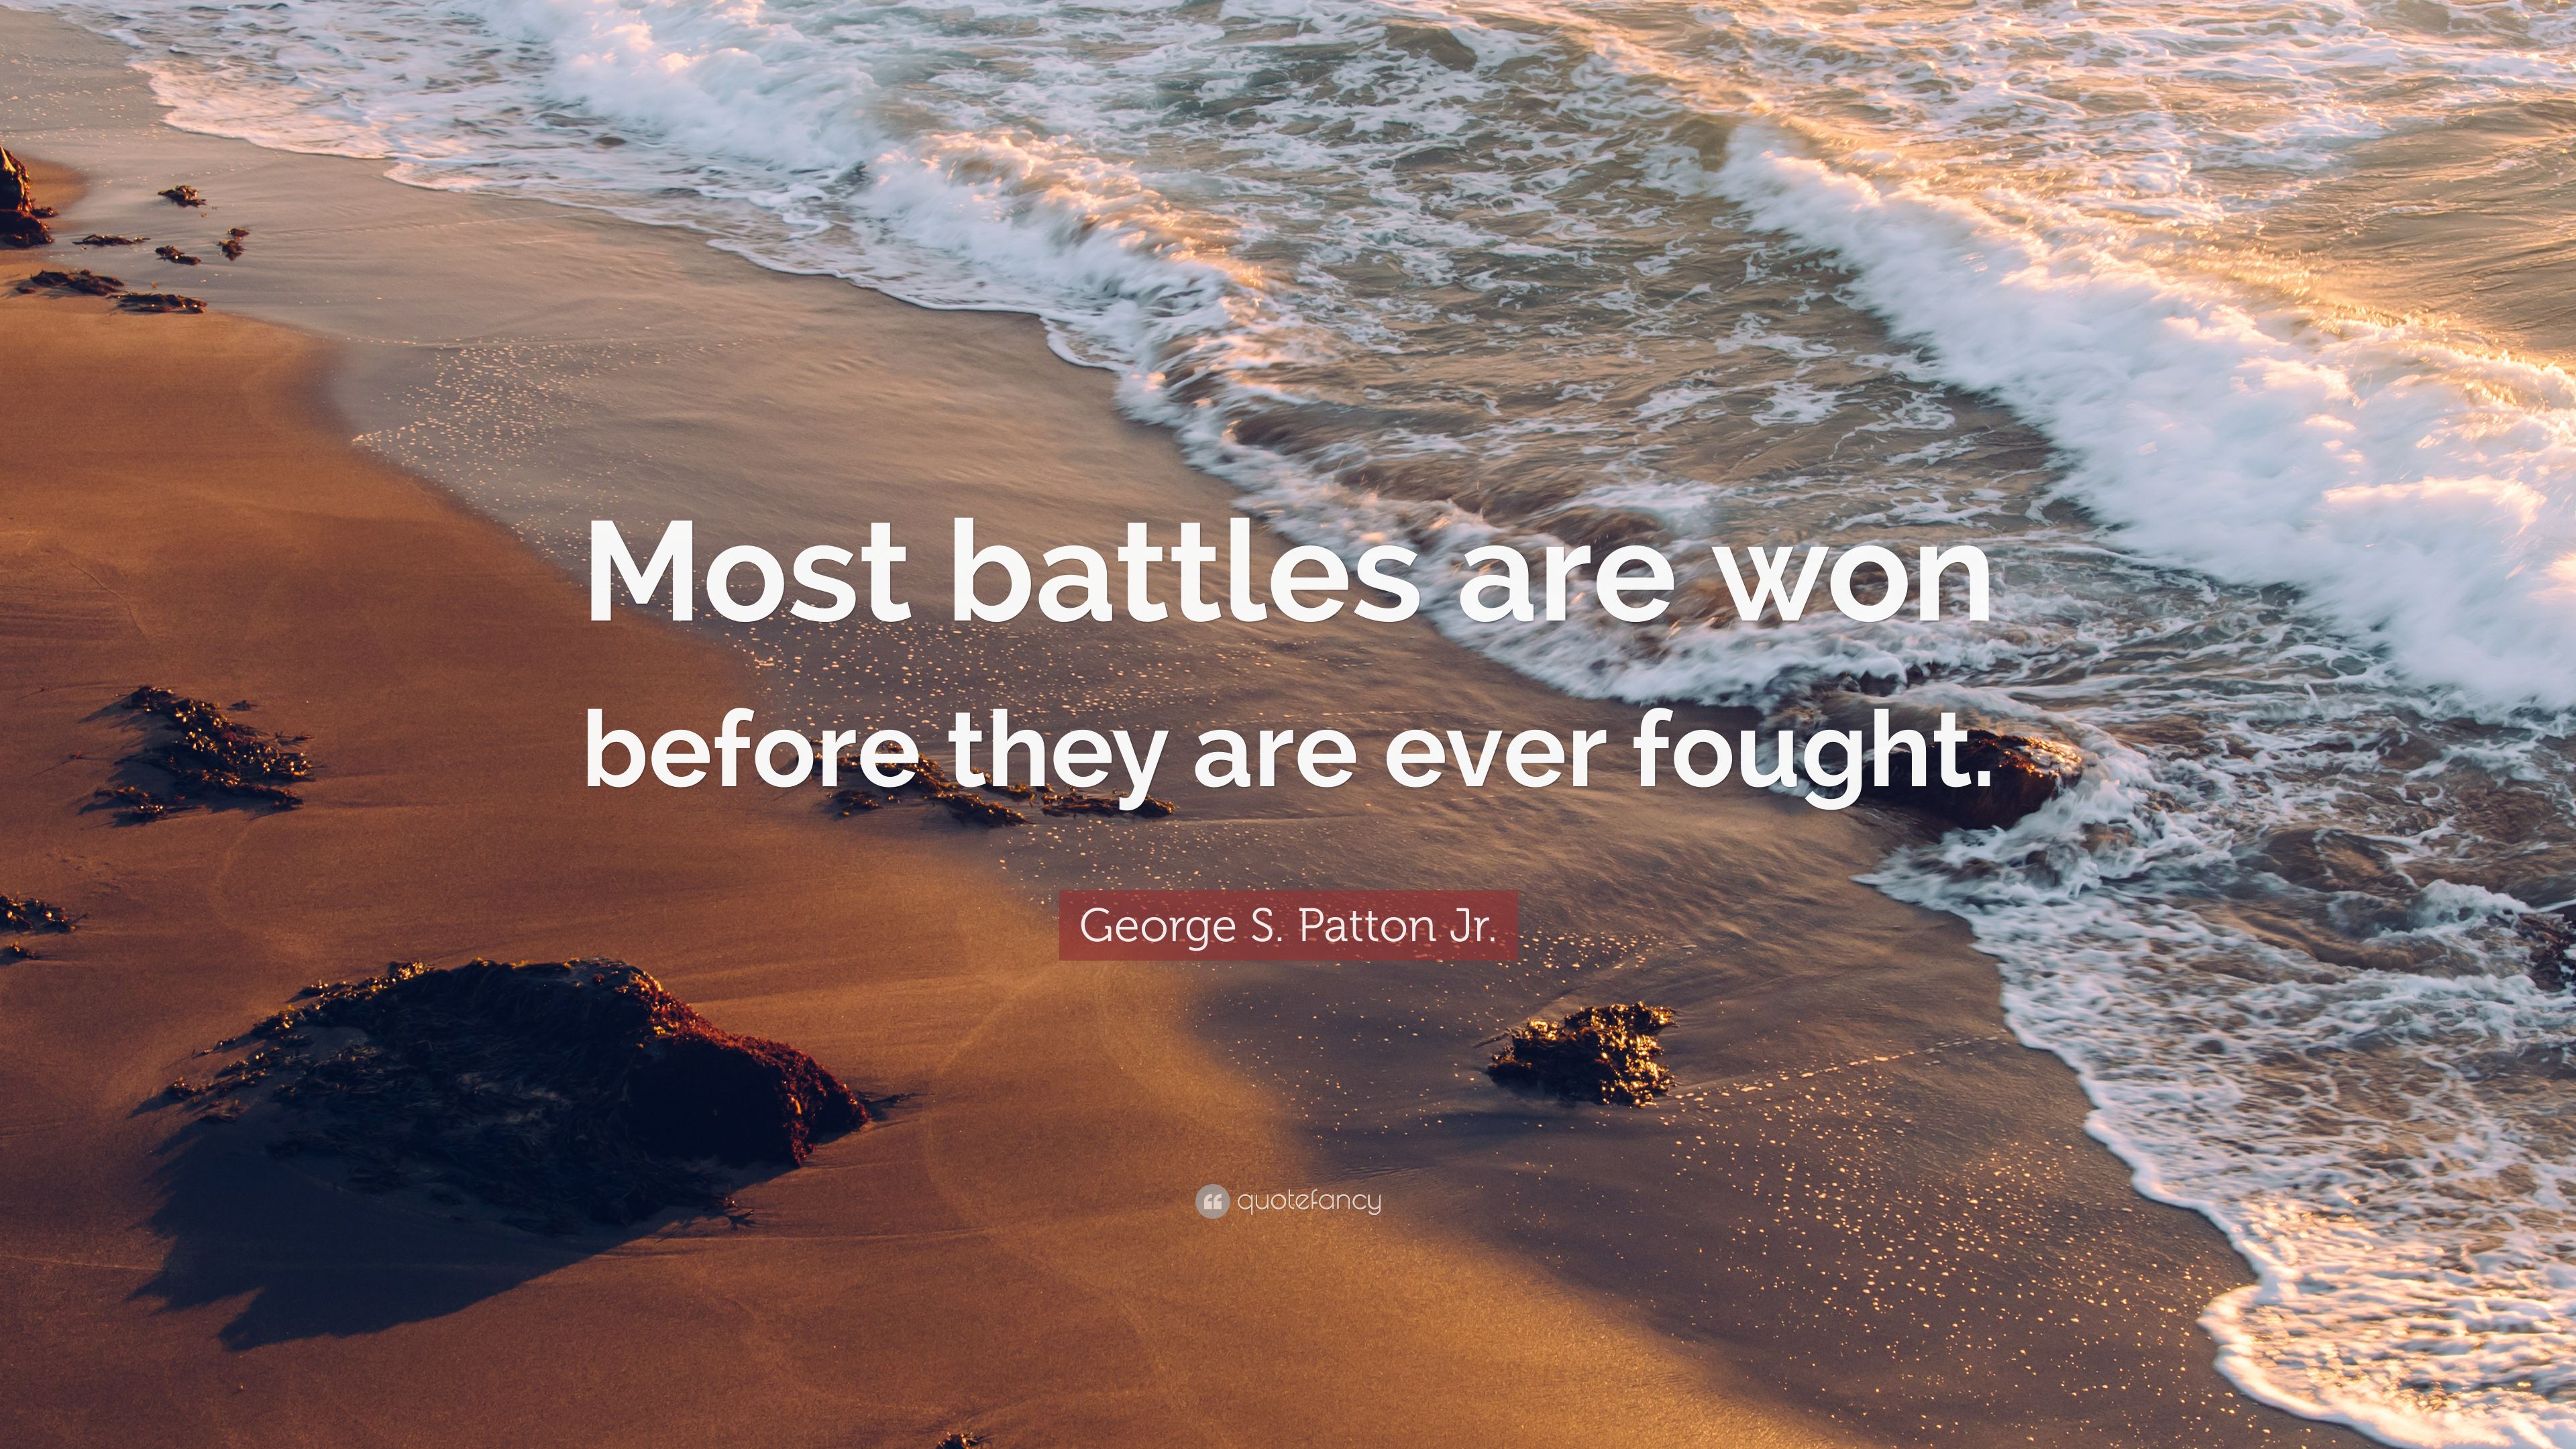 2104643-George-S-Patton-Jr-Quote-Most-battles-are-won-before-they-are-ever.jpg